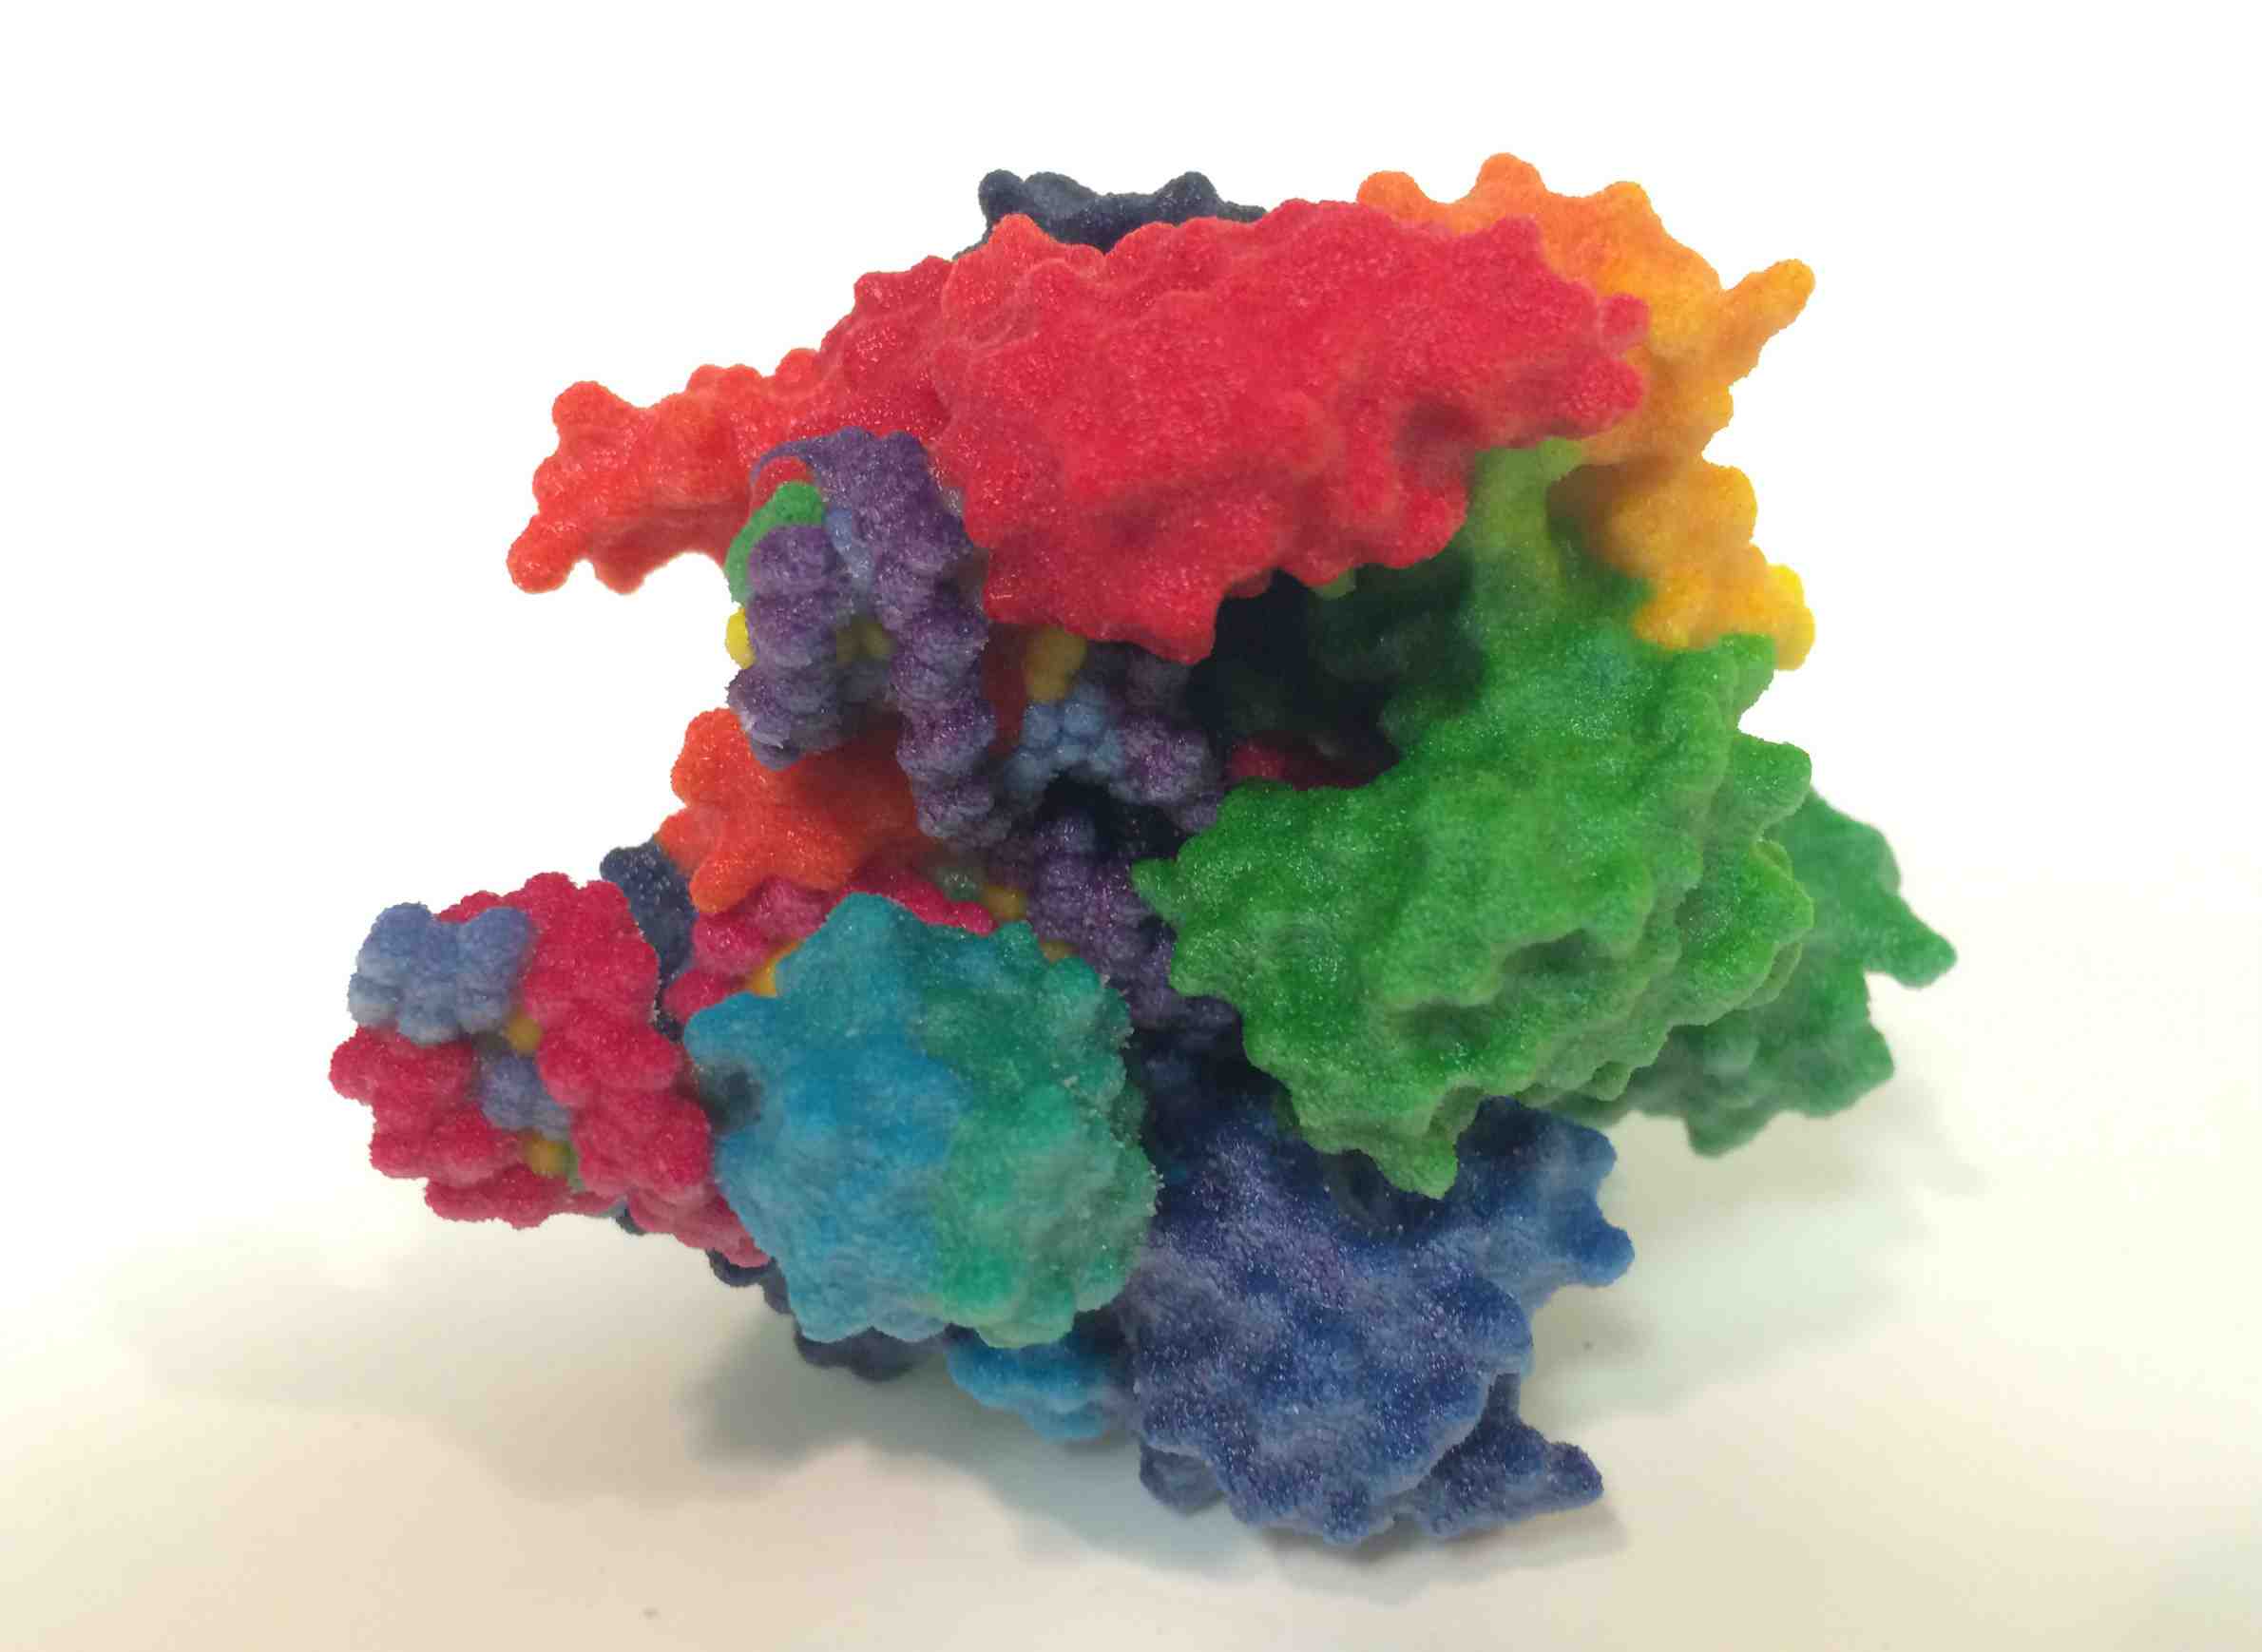 A 3-D model depicts the Cas9 protein